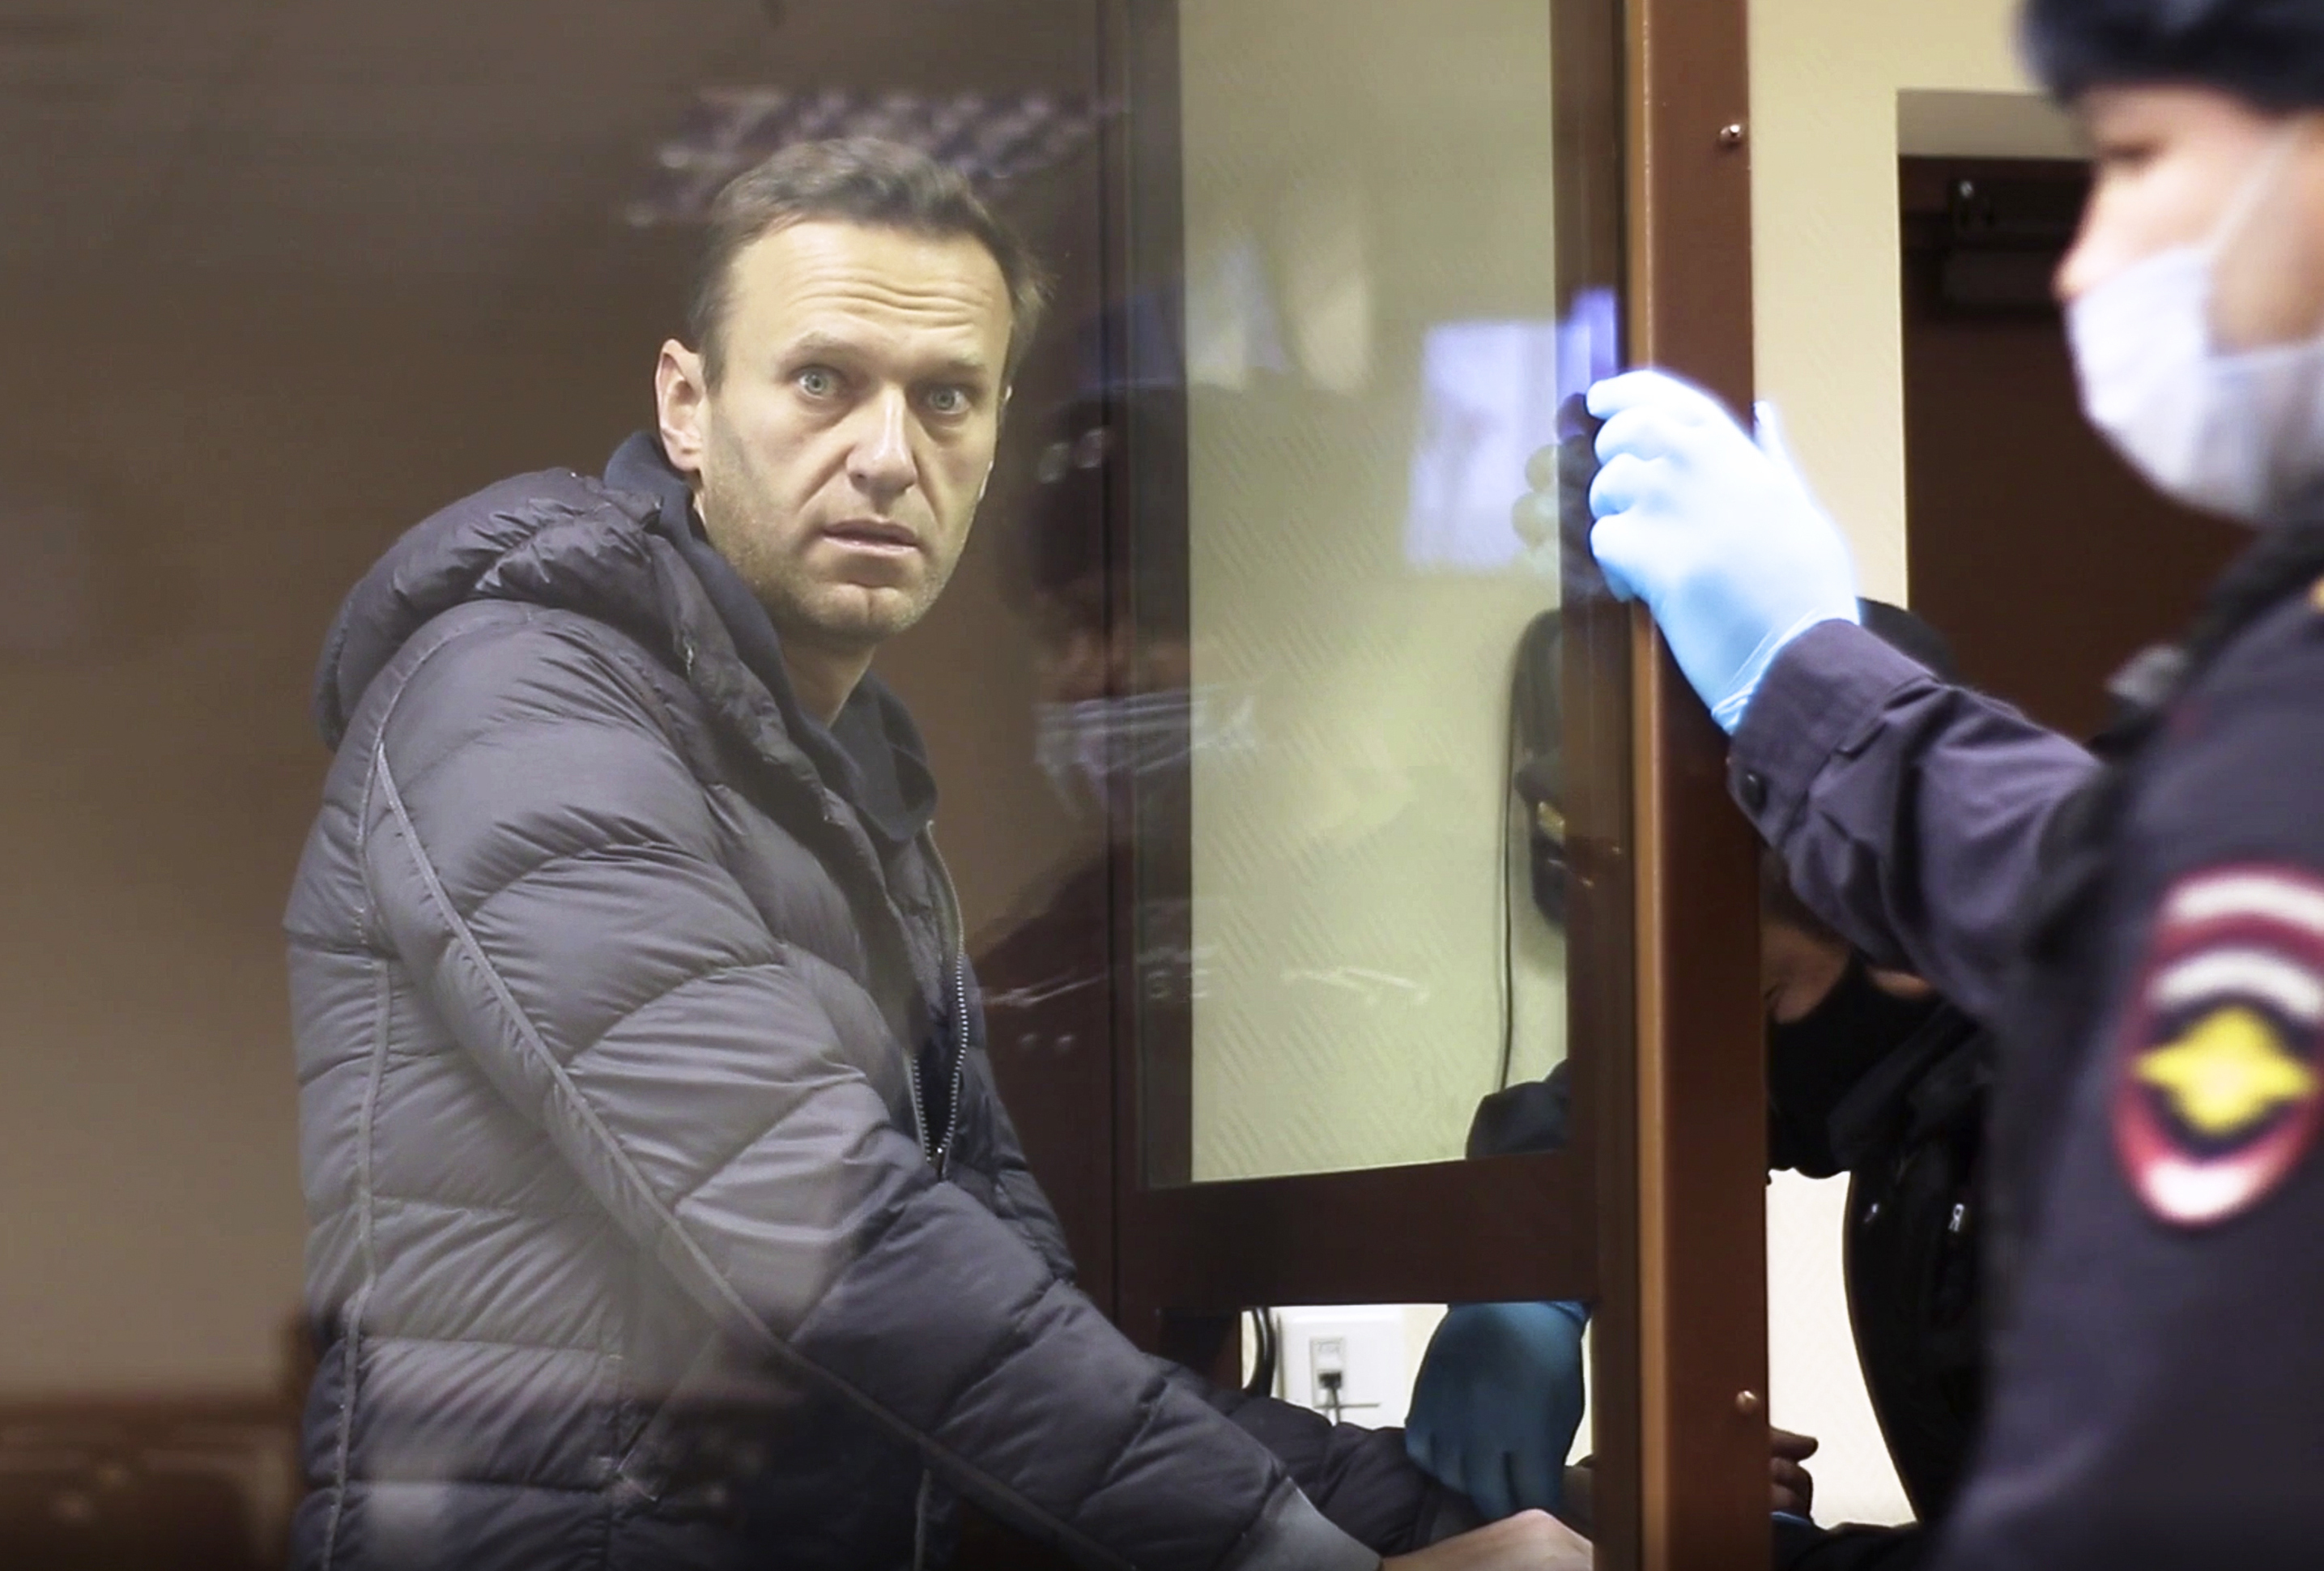 US Imposes Sanctions on Russia Over Navalny Poisoning